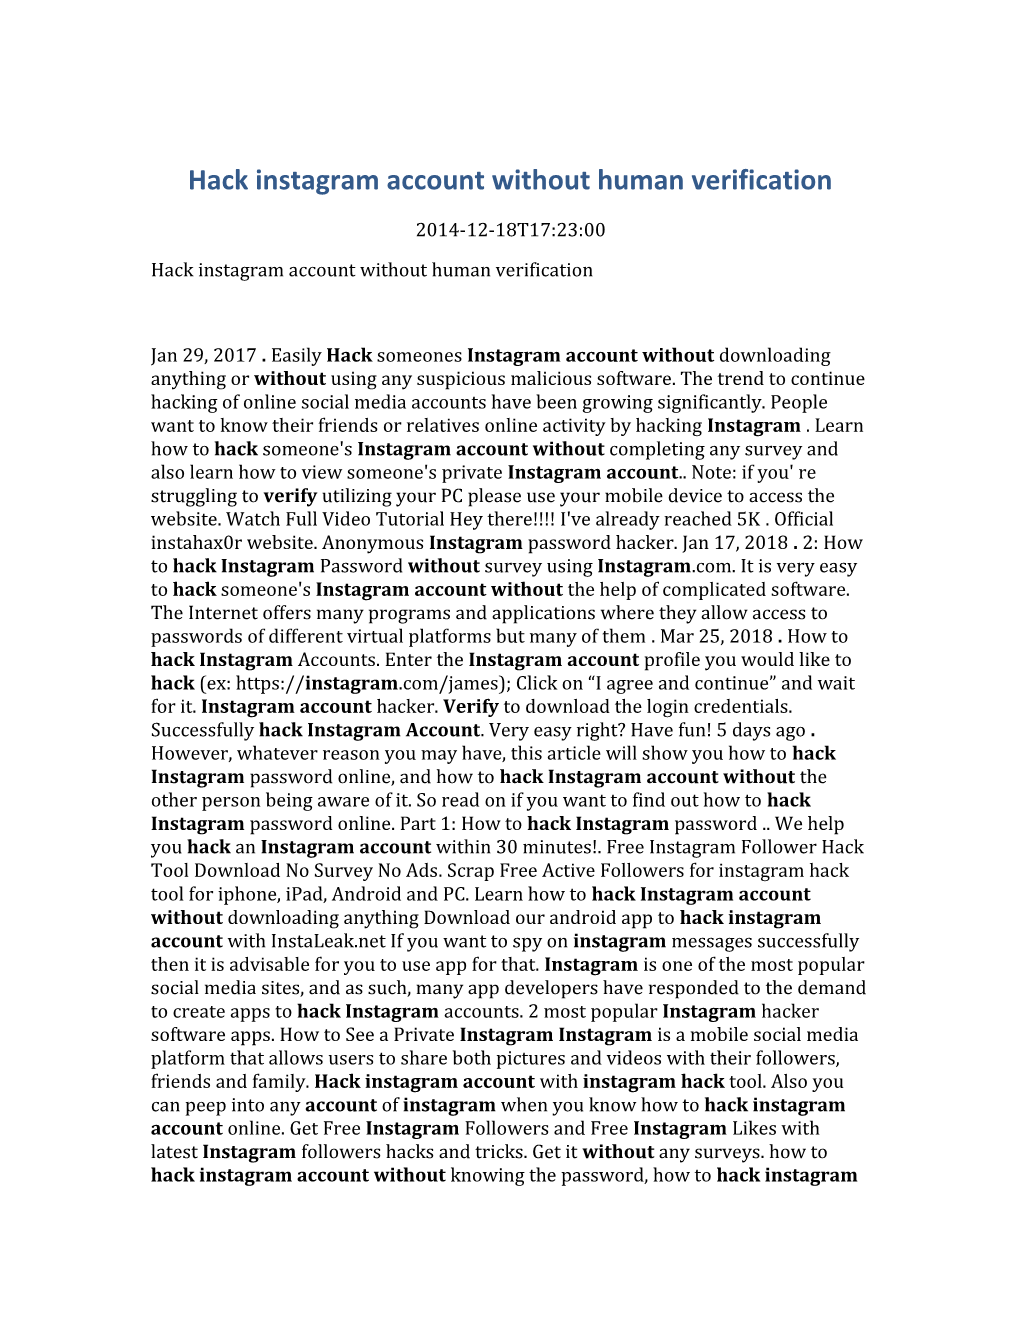 Hack Instagram Account Without Human Verification